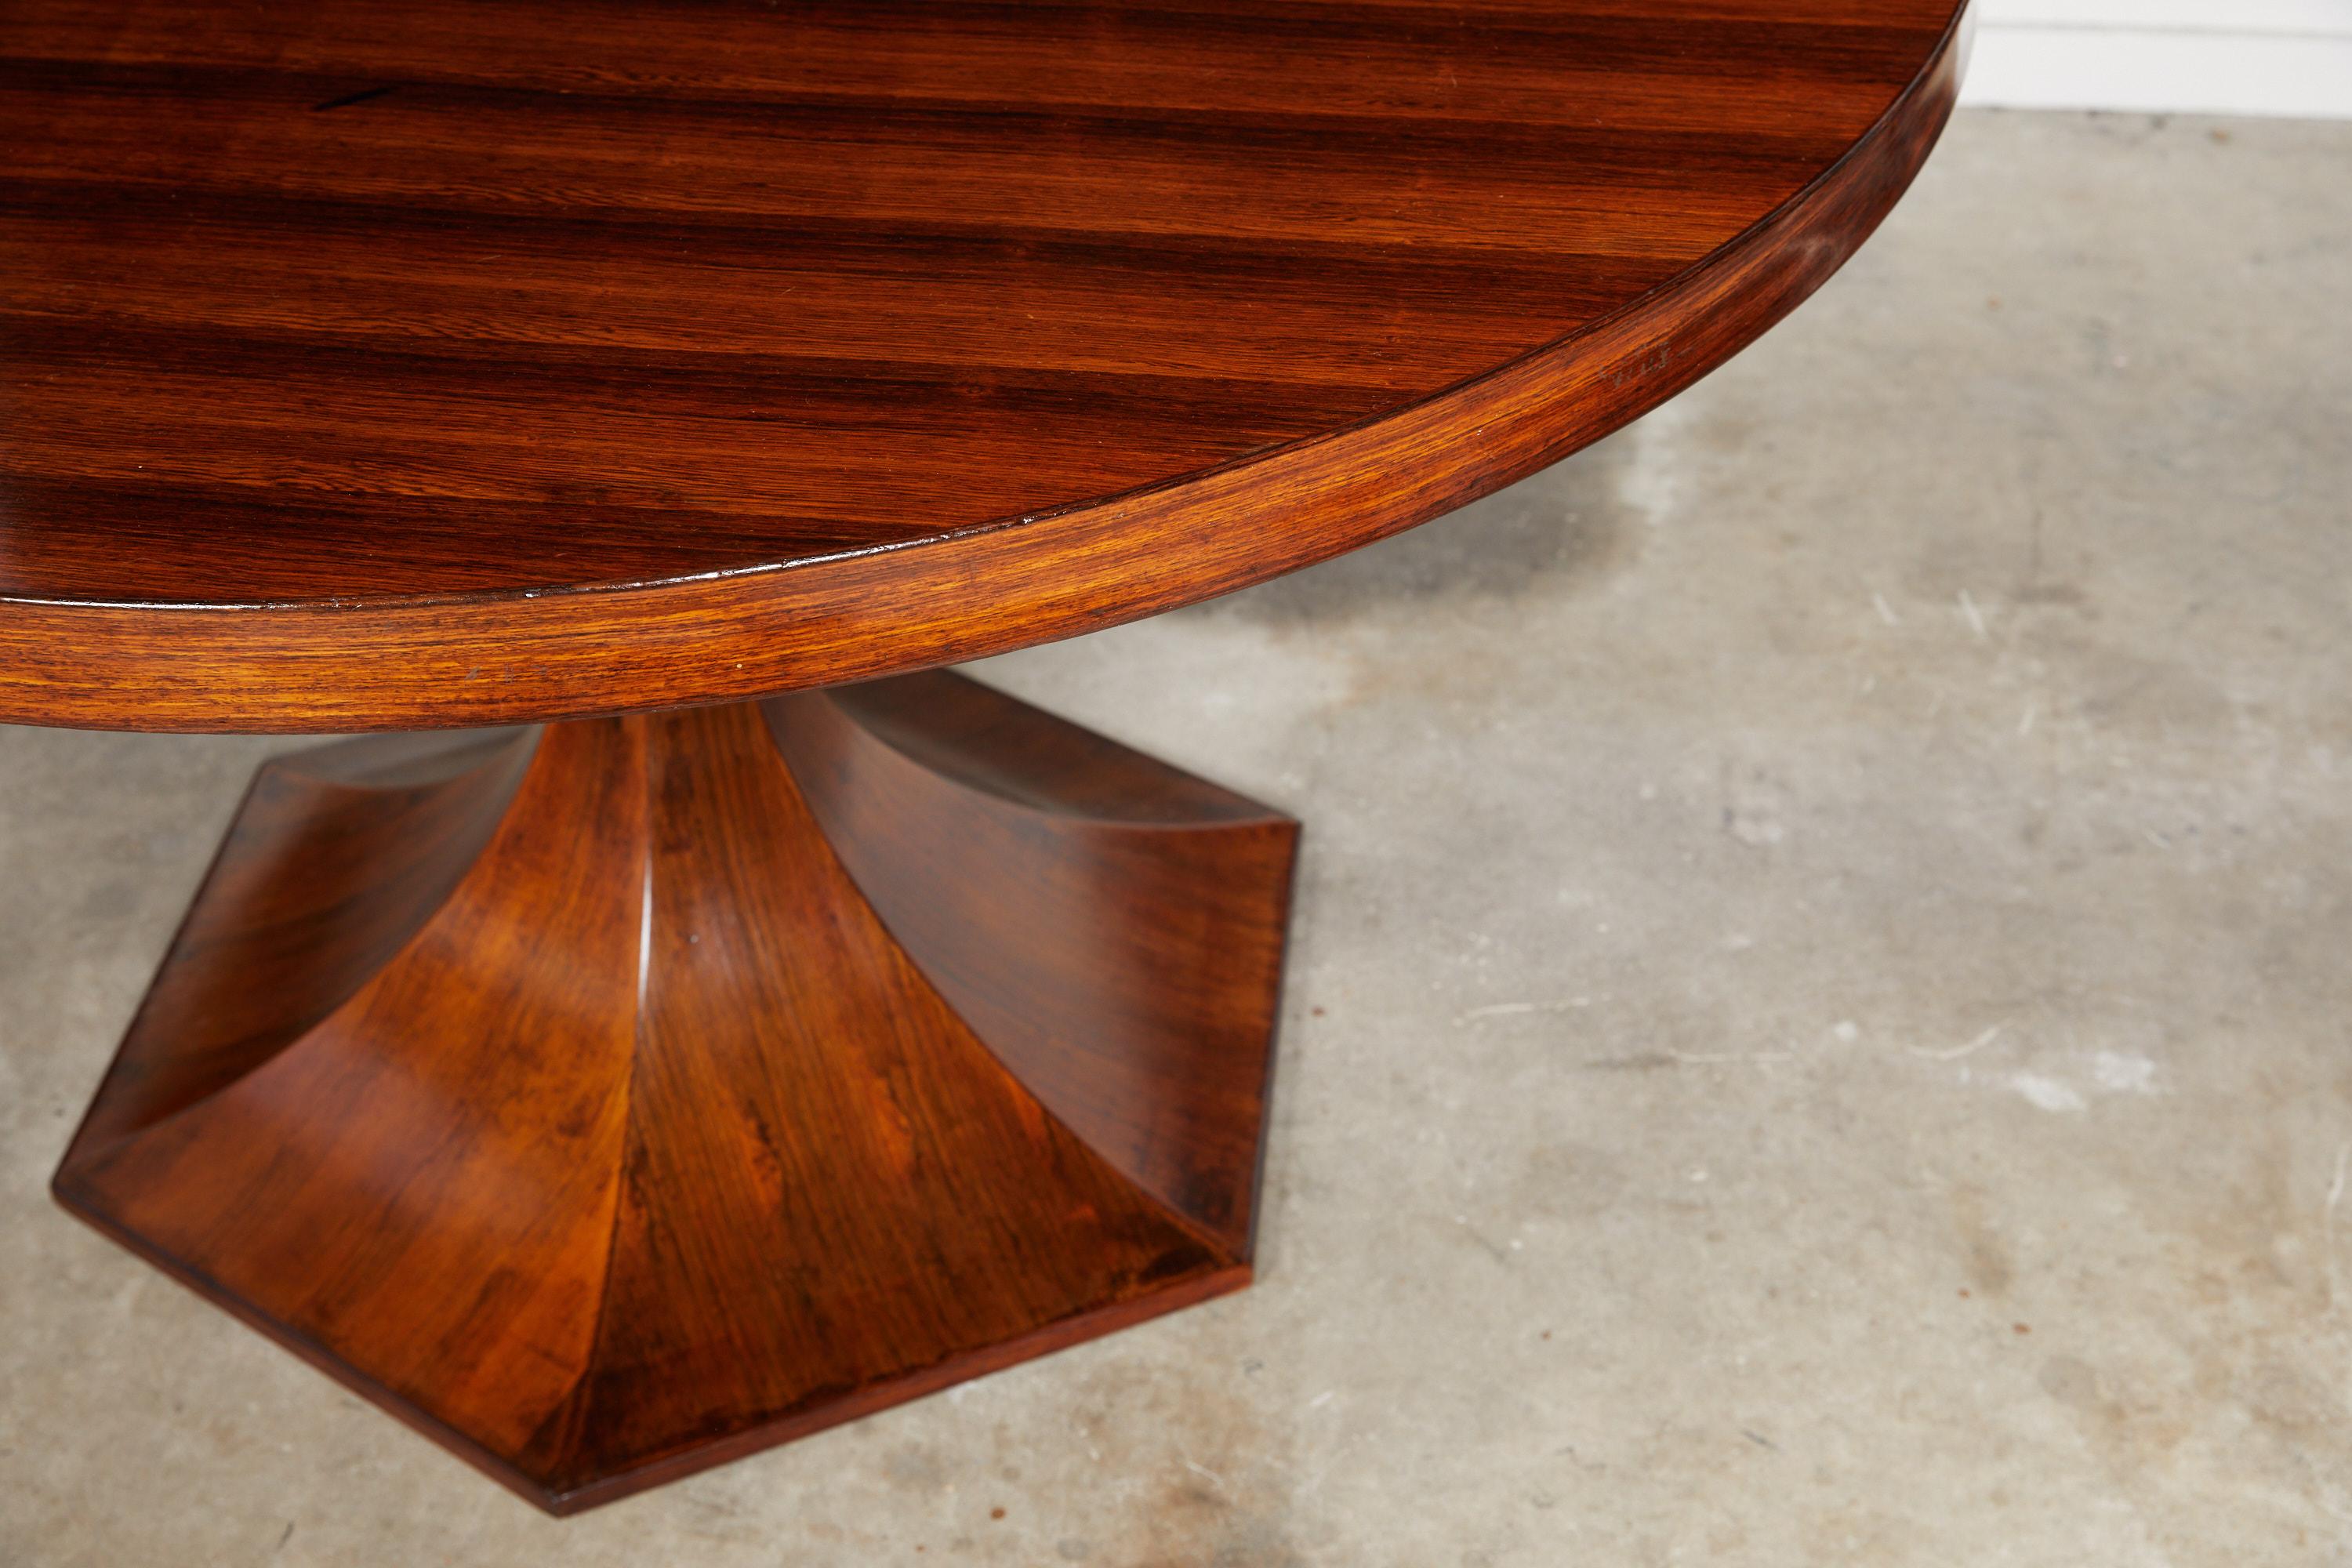 20th century Italian dining table of palisander wood with a round tabletop on a hexagonal tulip shaped pedestal base.